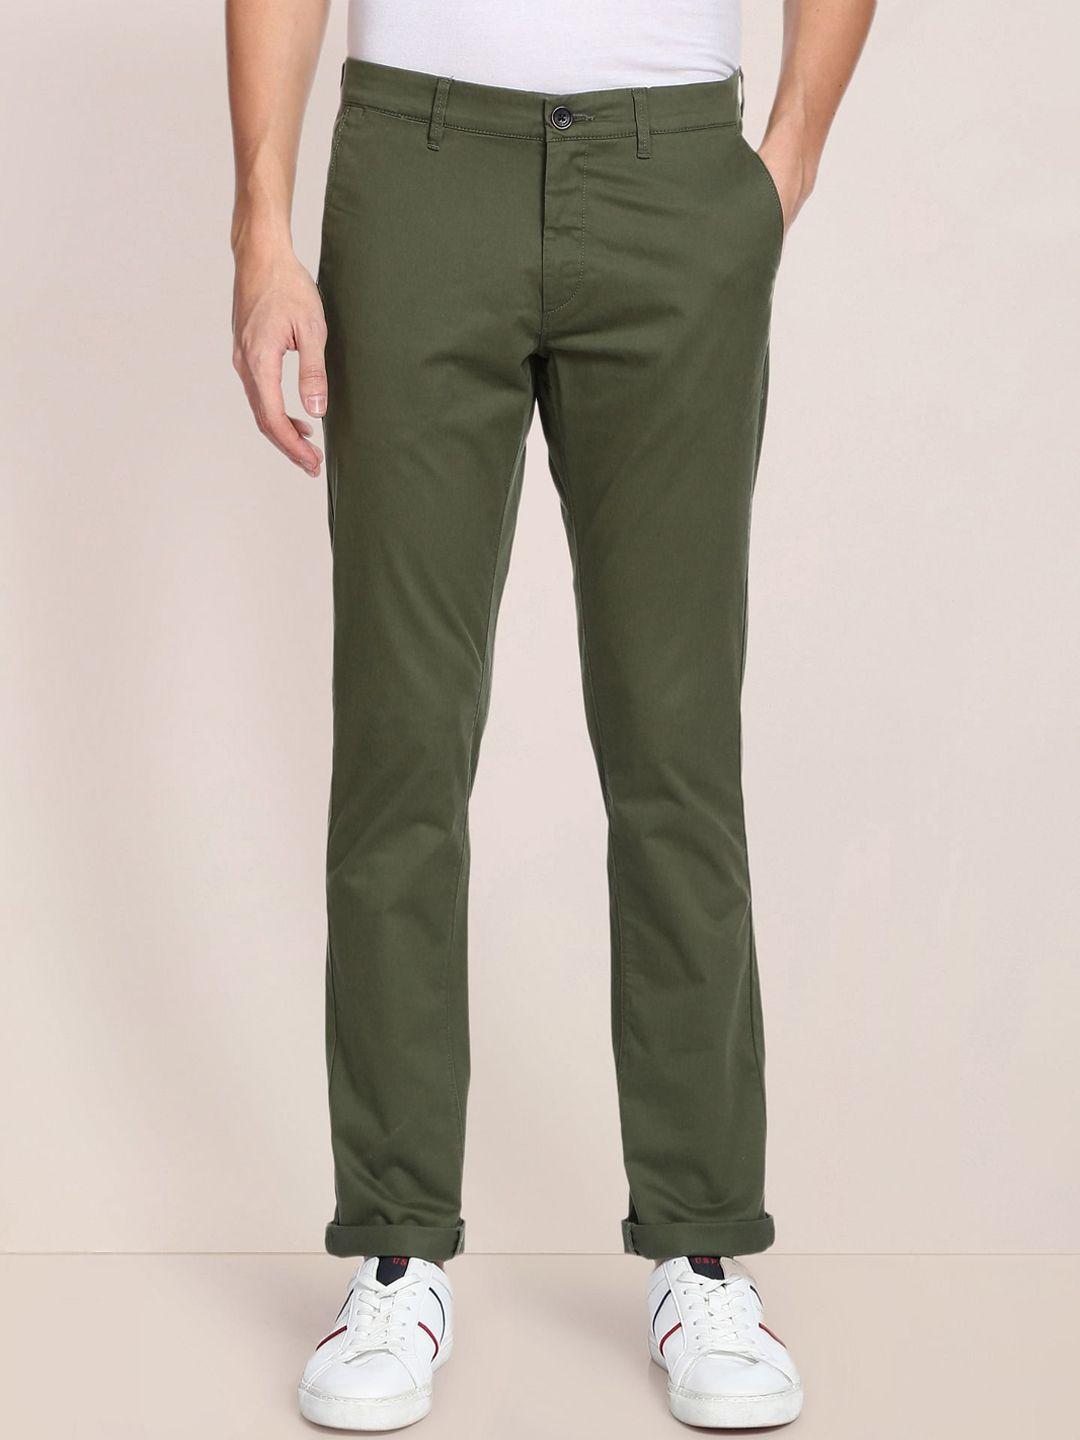 u s polo assn men green slim fit chinos trousers